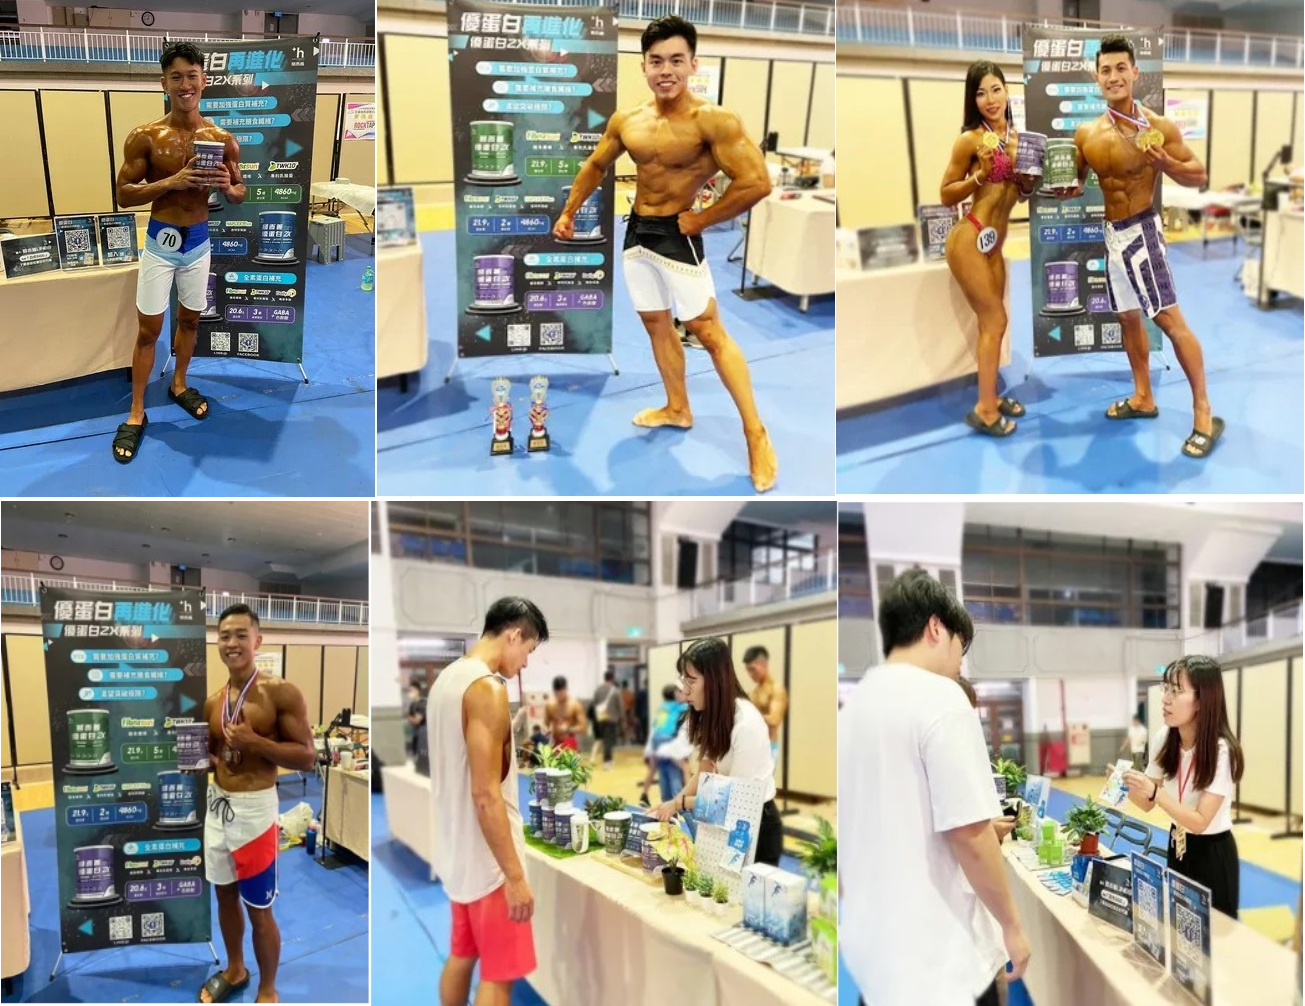 Earsun High-protein milk powder designed for fitness